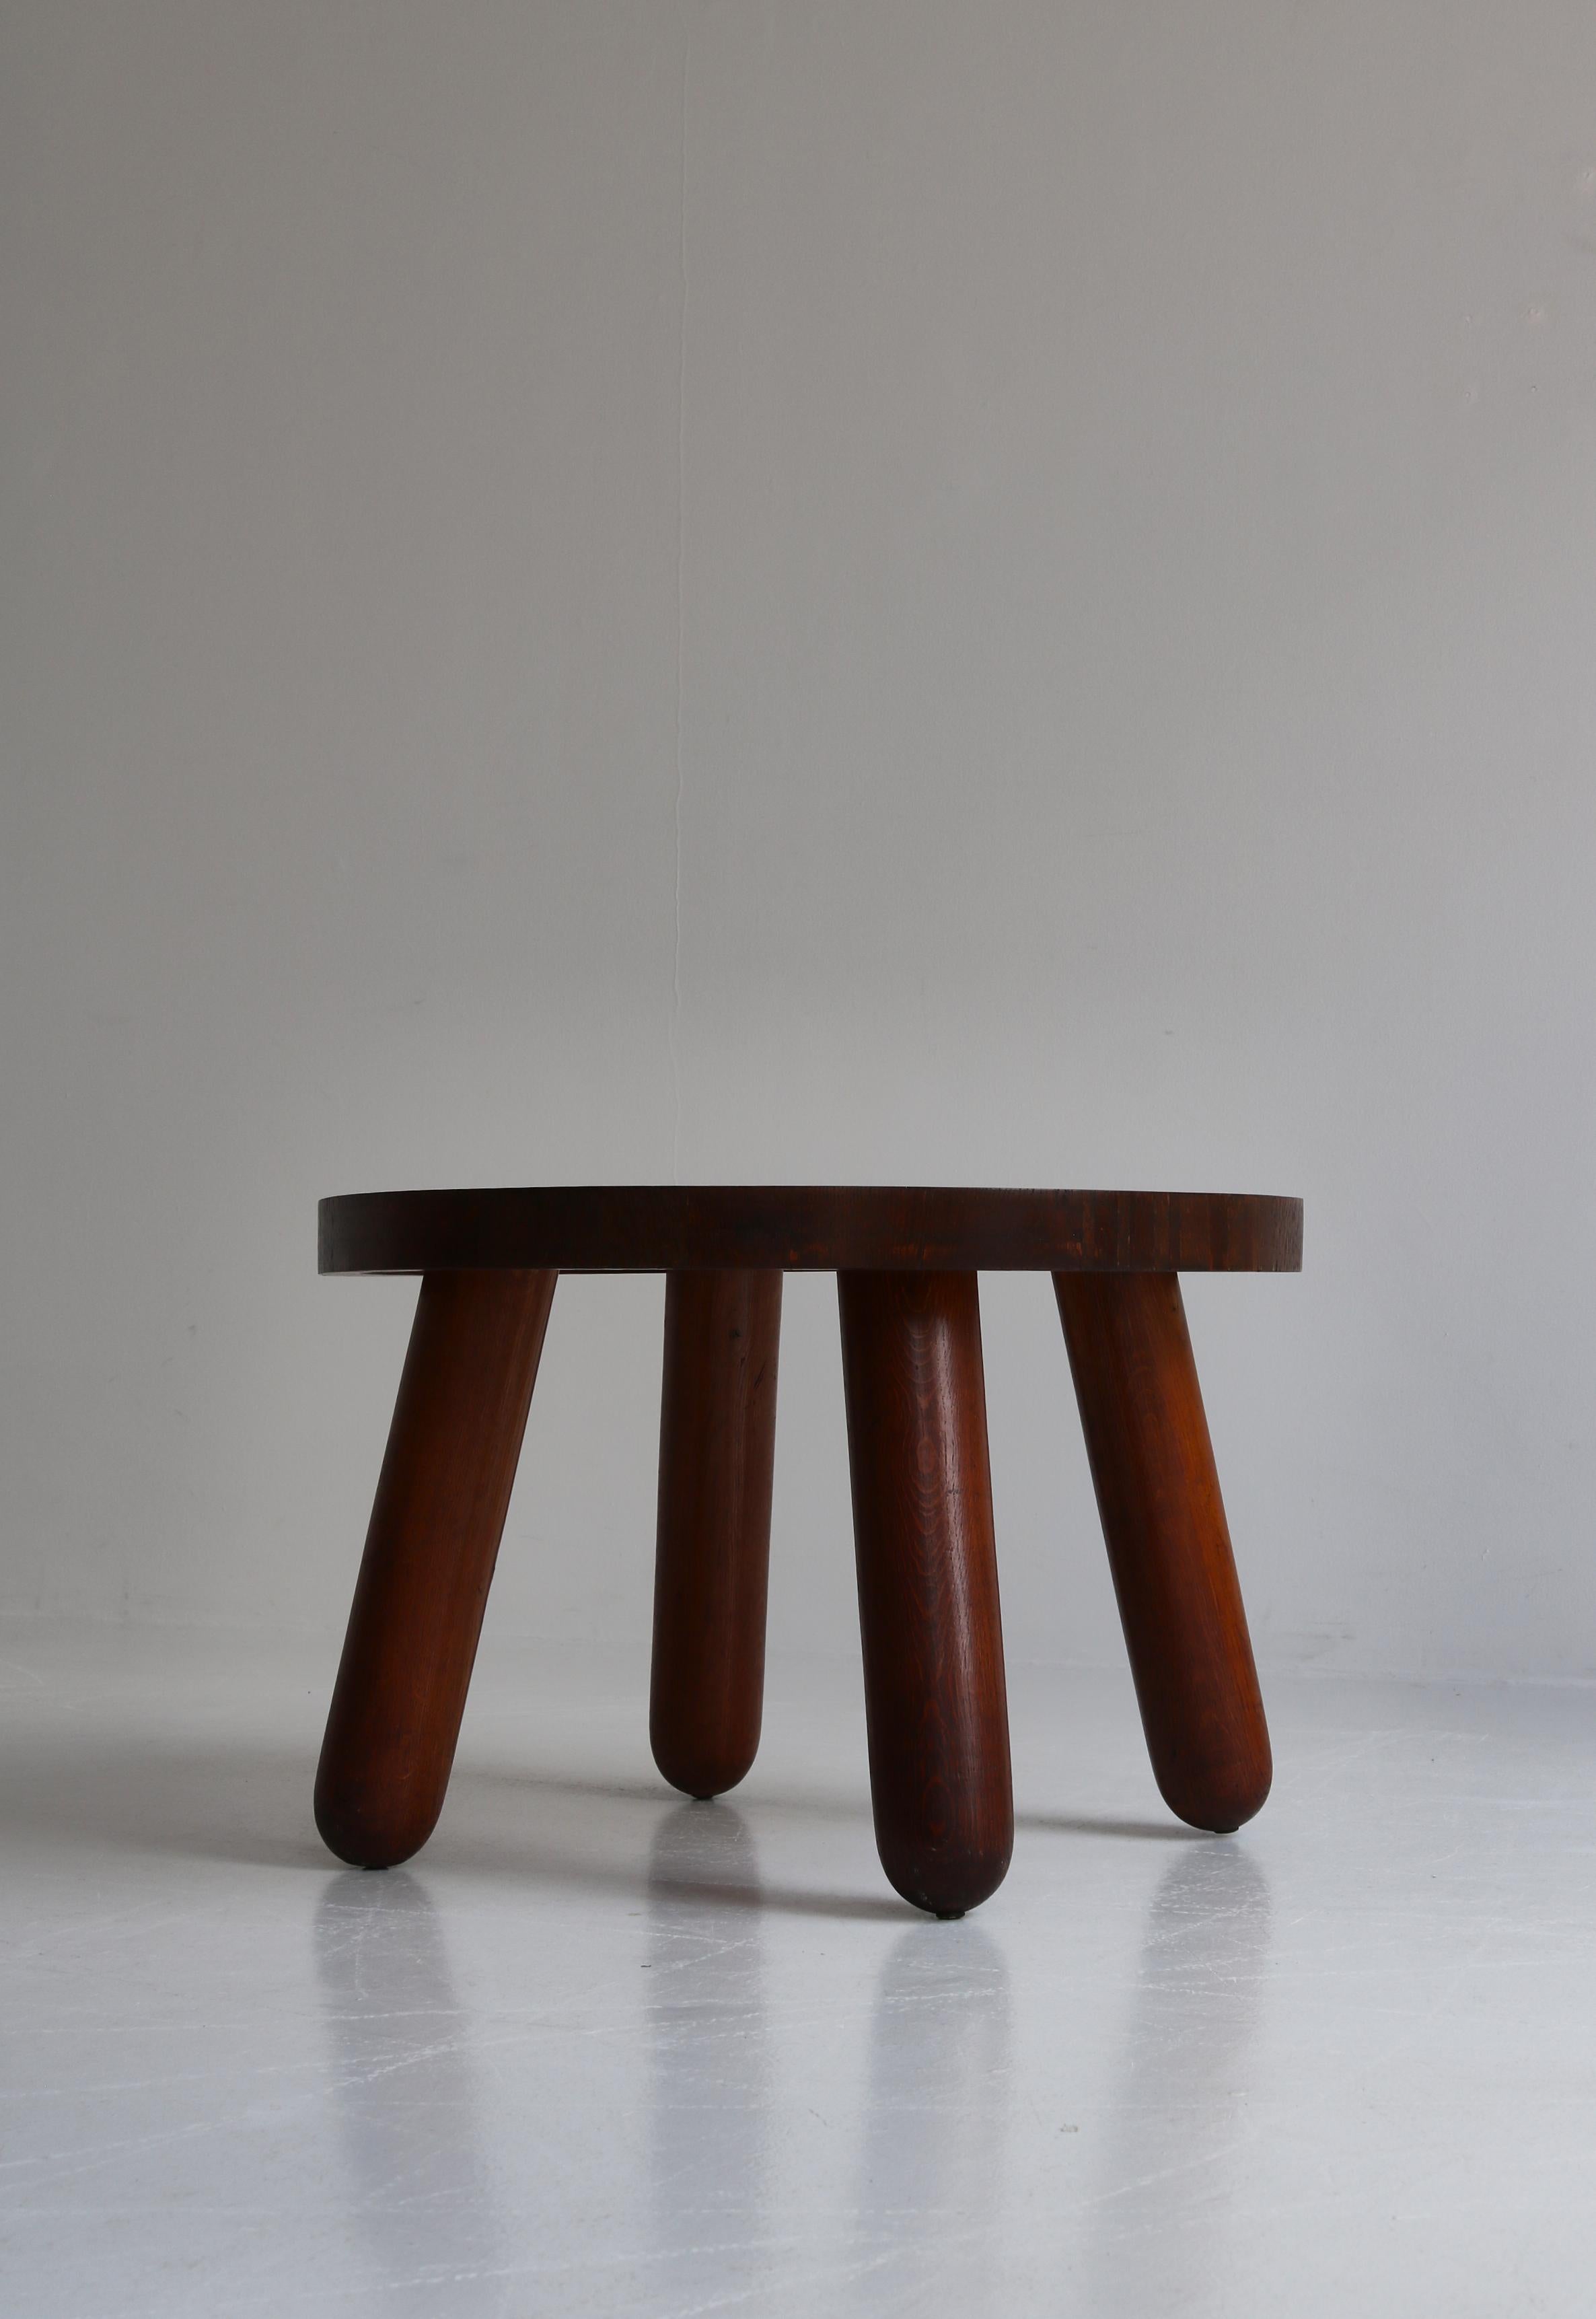 Chunky Danish Modern Side Table in Stained Oak by Otto Færge, Denmark, 1940s For Sale 4